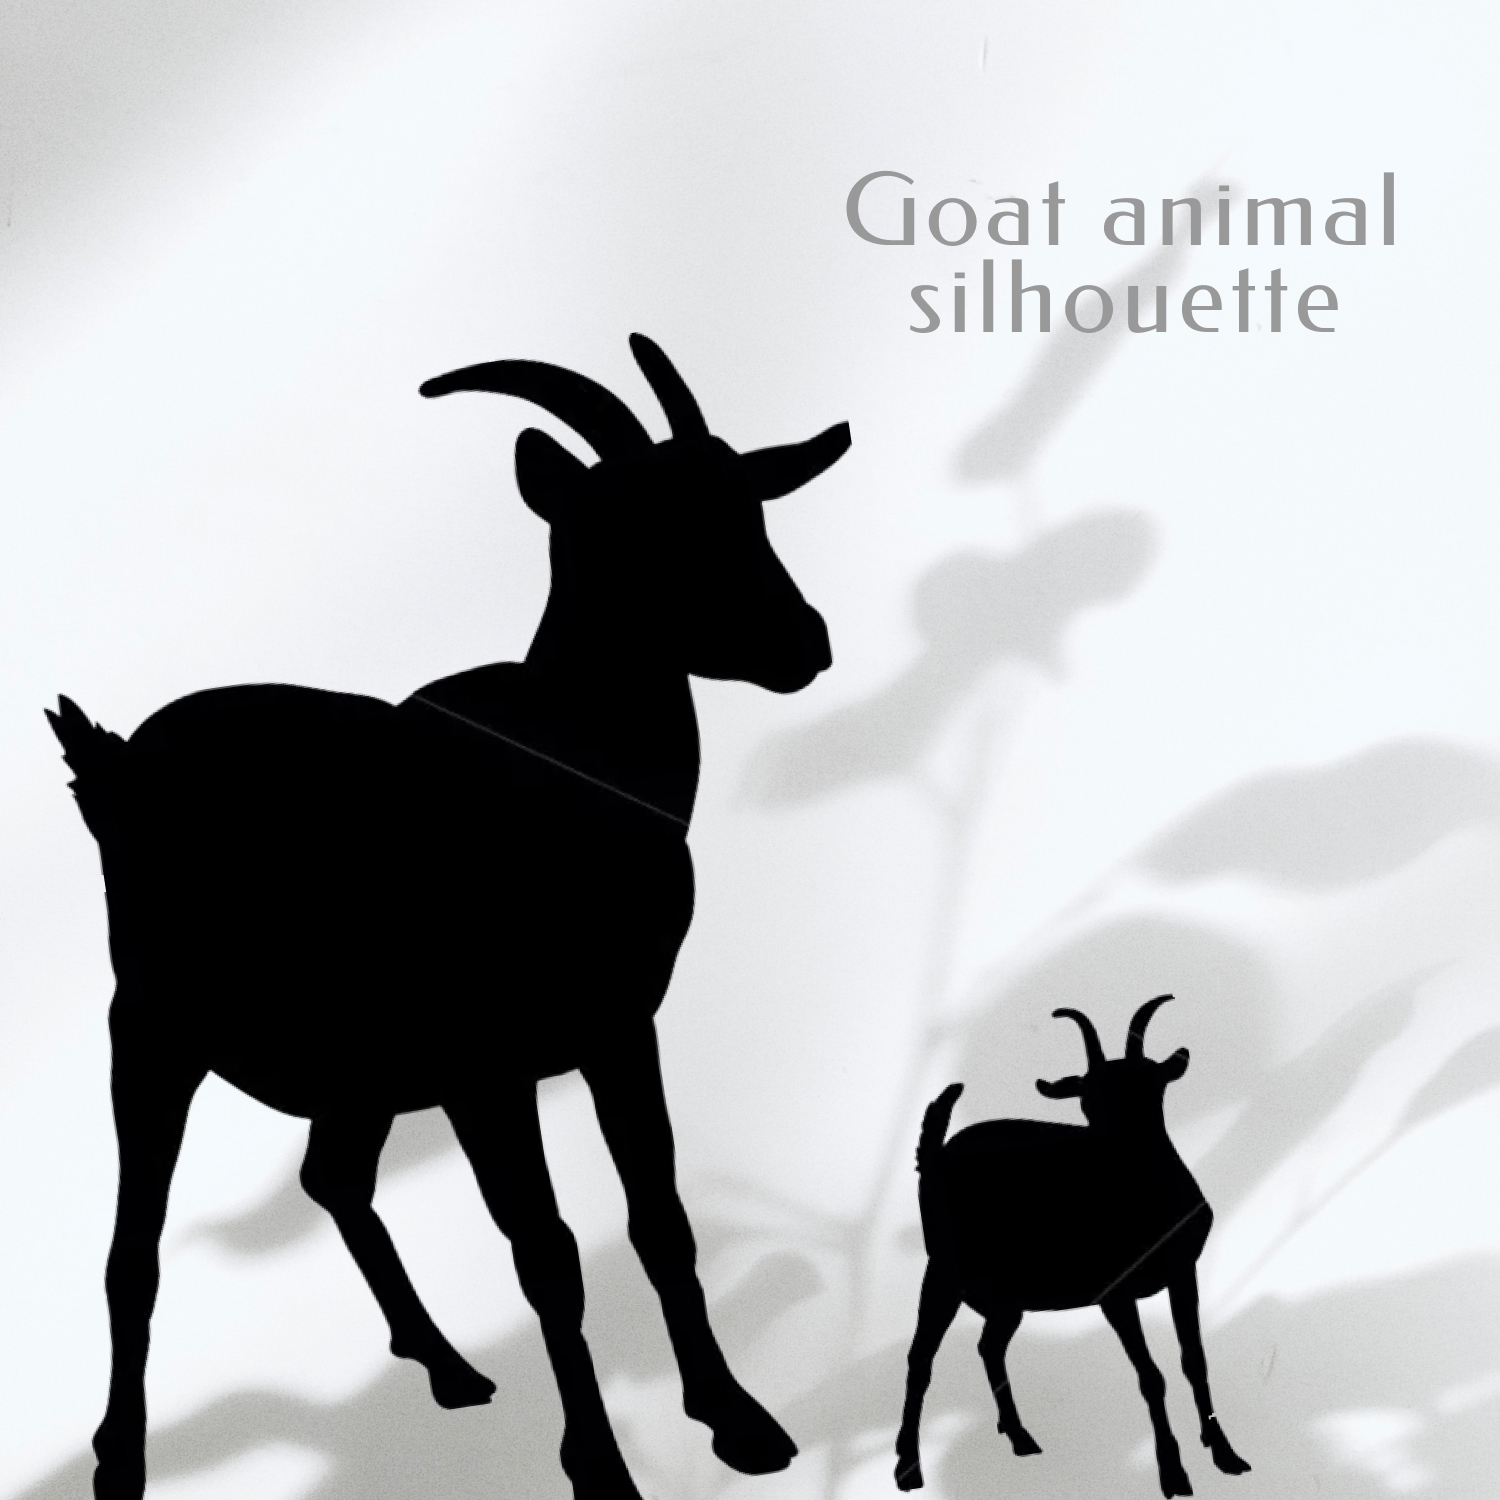 Goat Animal Silhouette cover image.